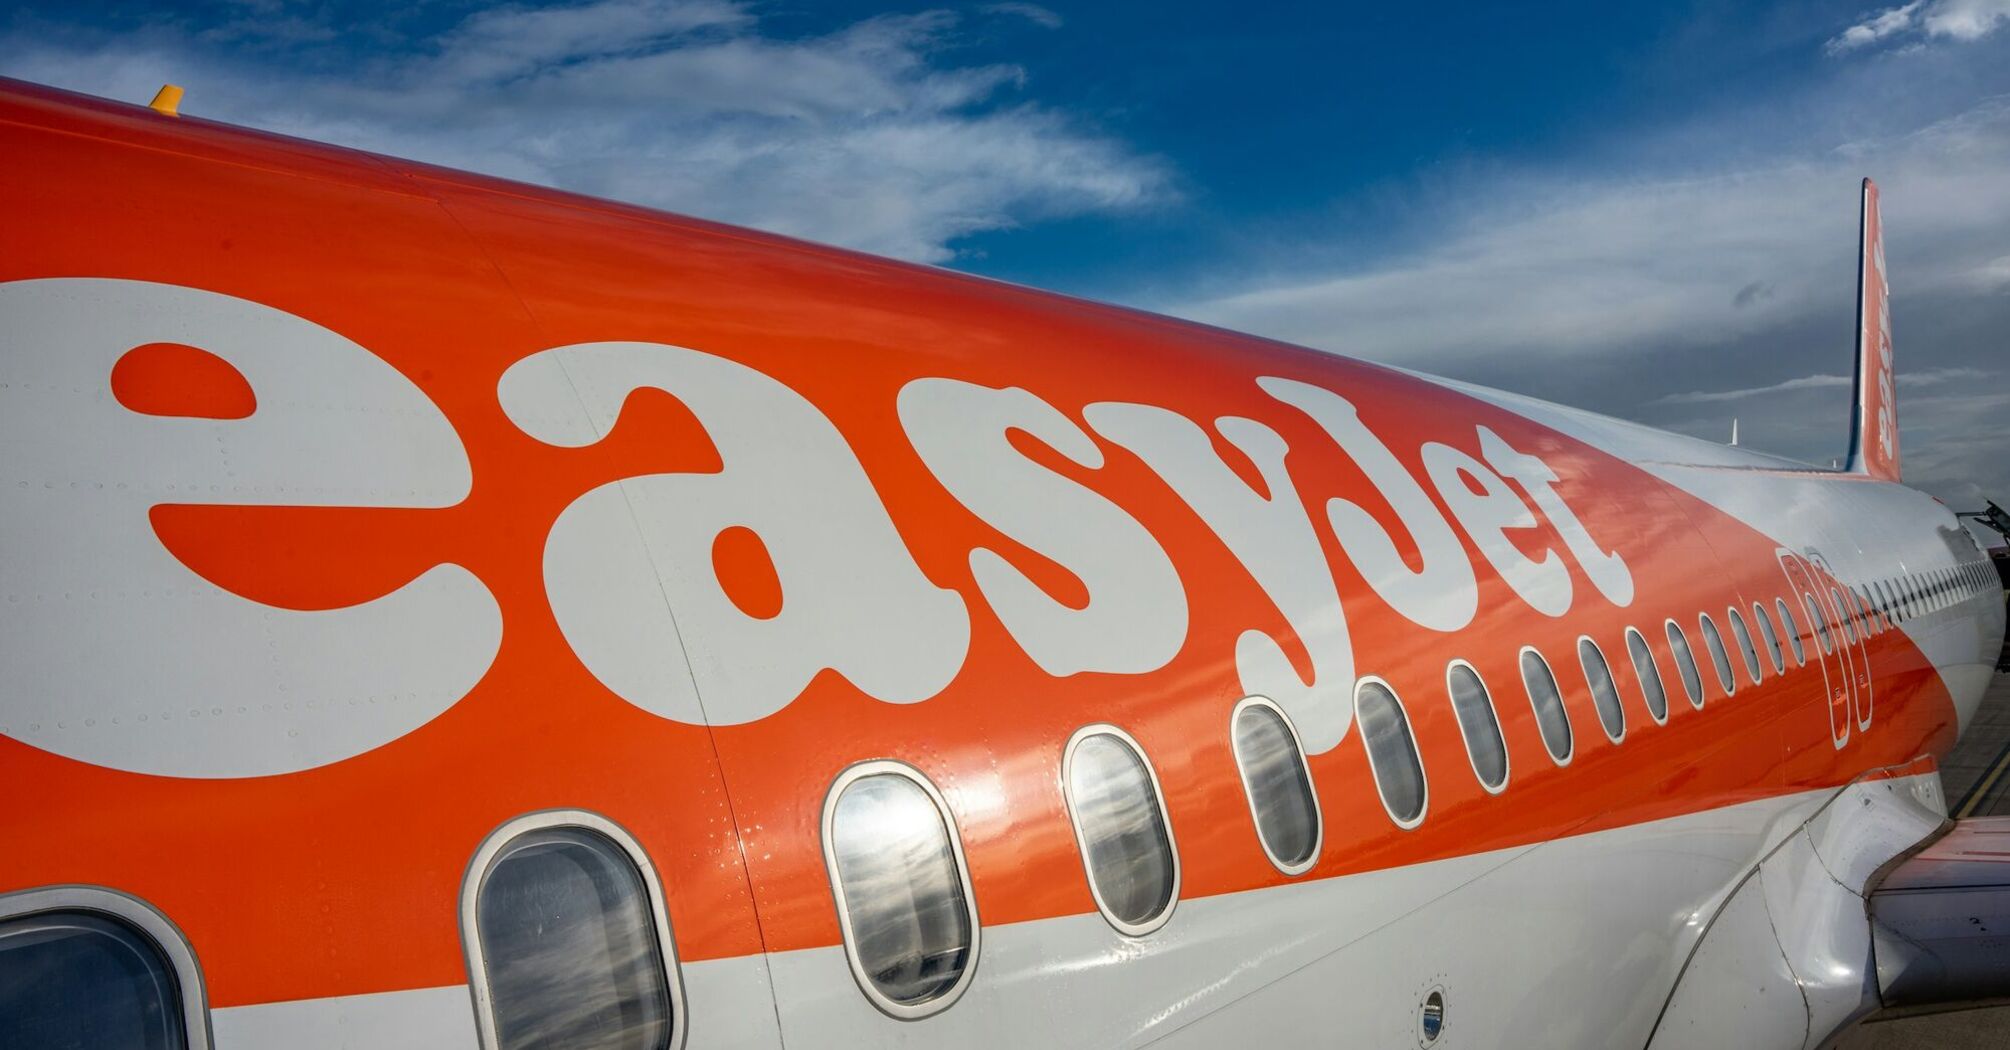 easyJet airplane with logo on the fuselage